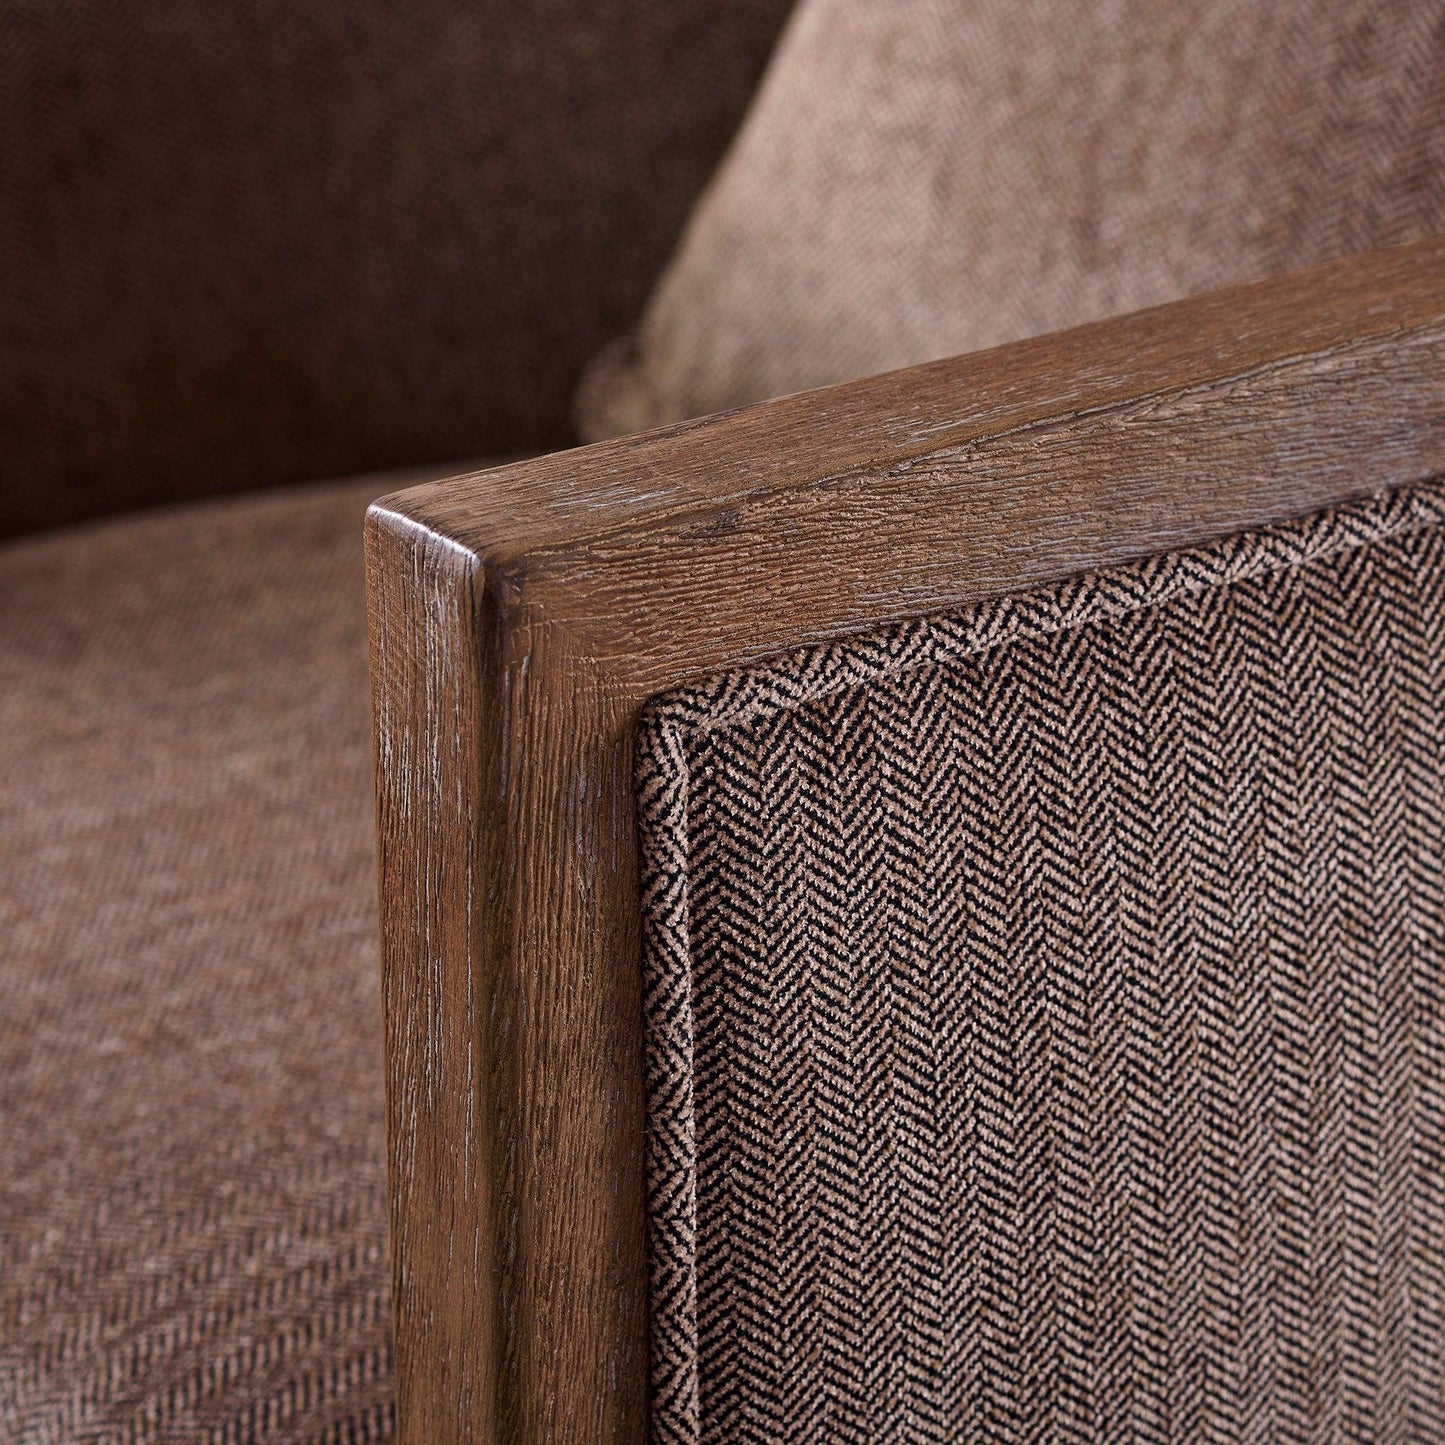 Imperial Accent Arm Chair - Wild Wings